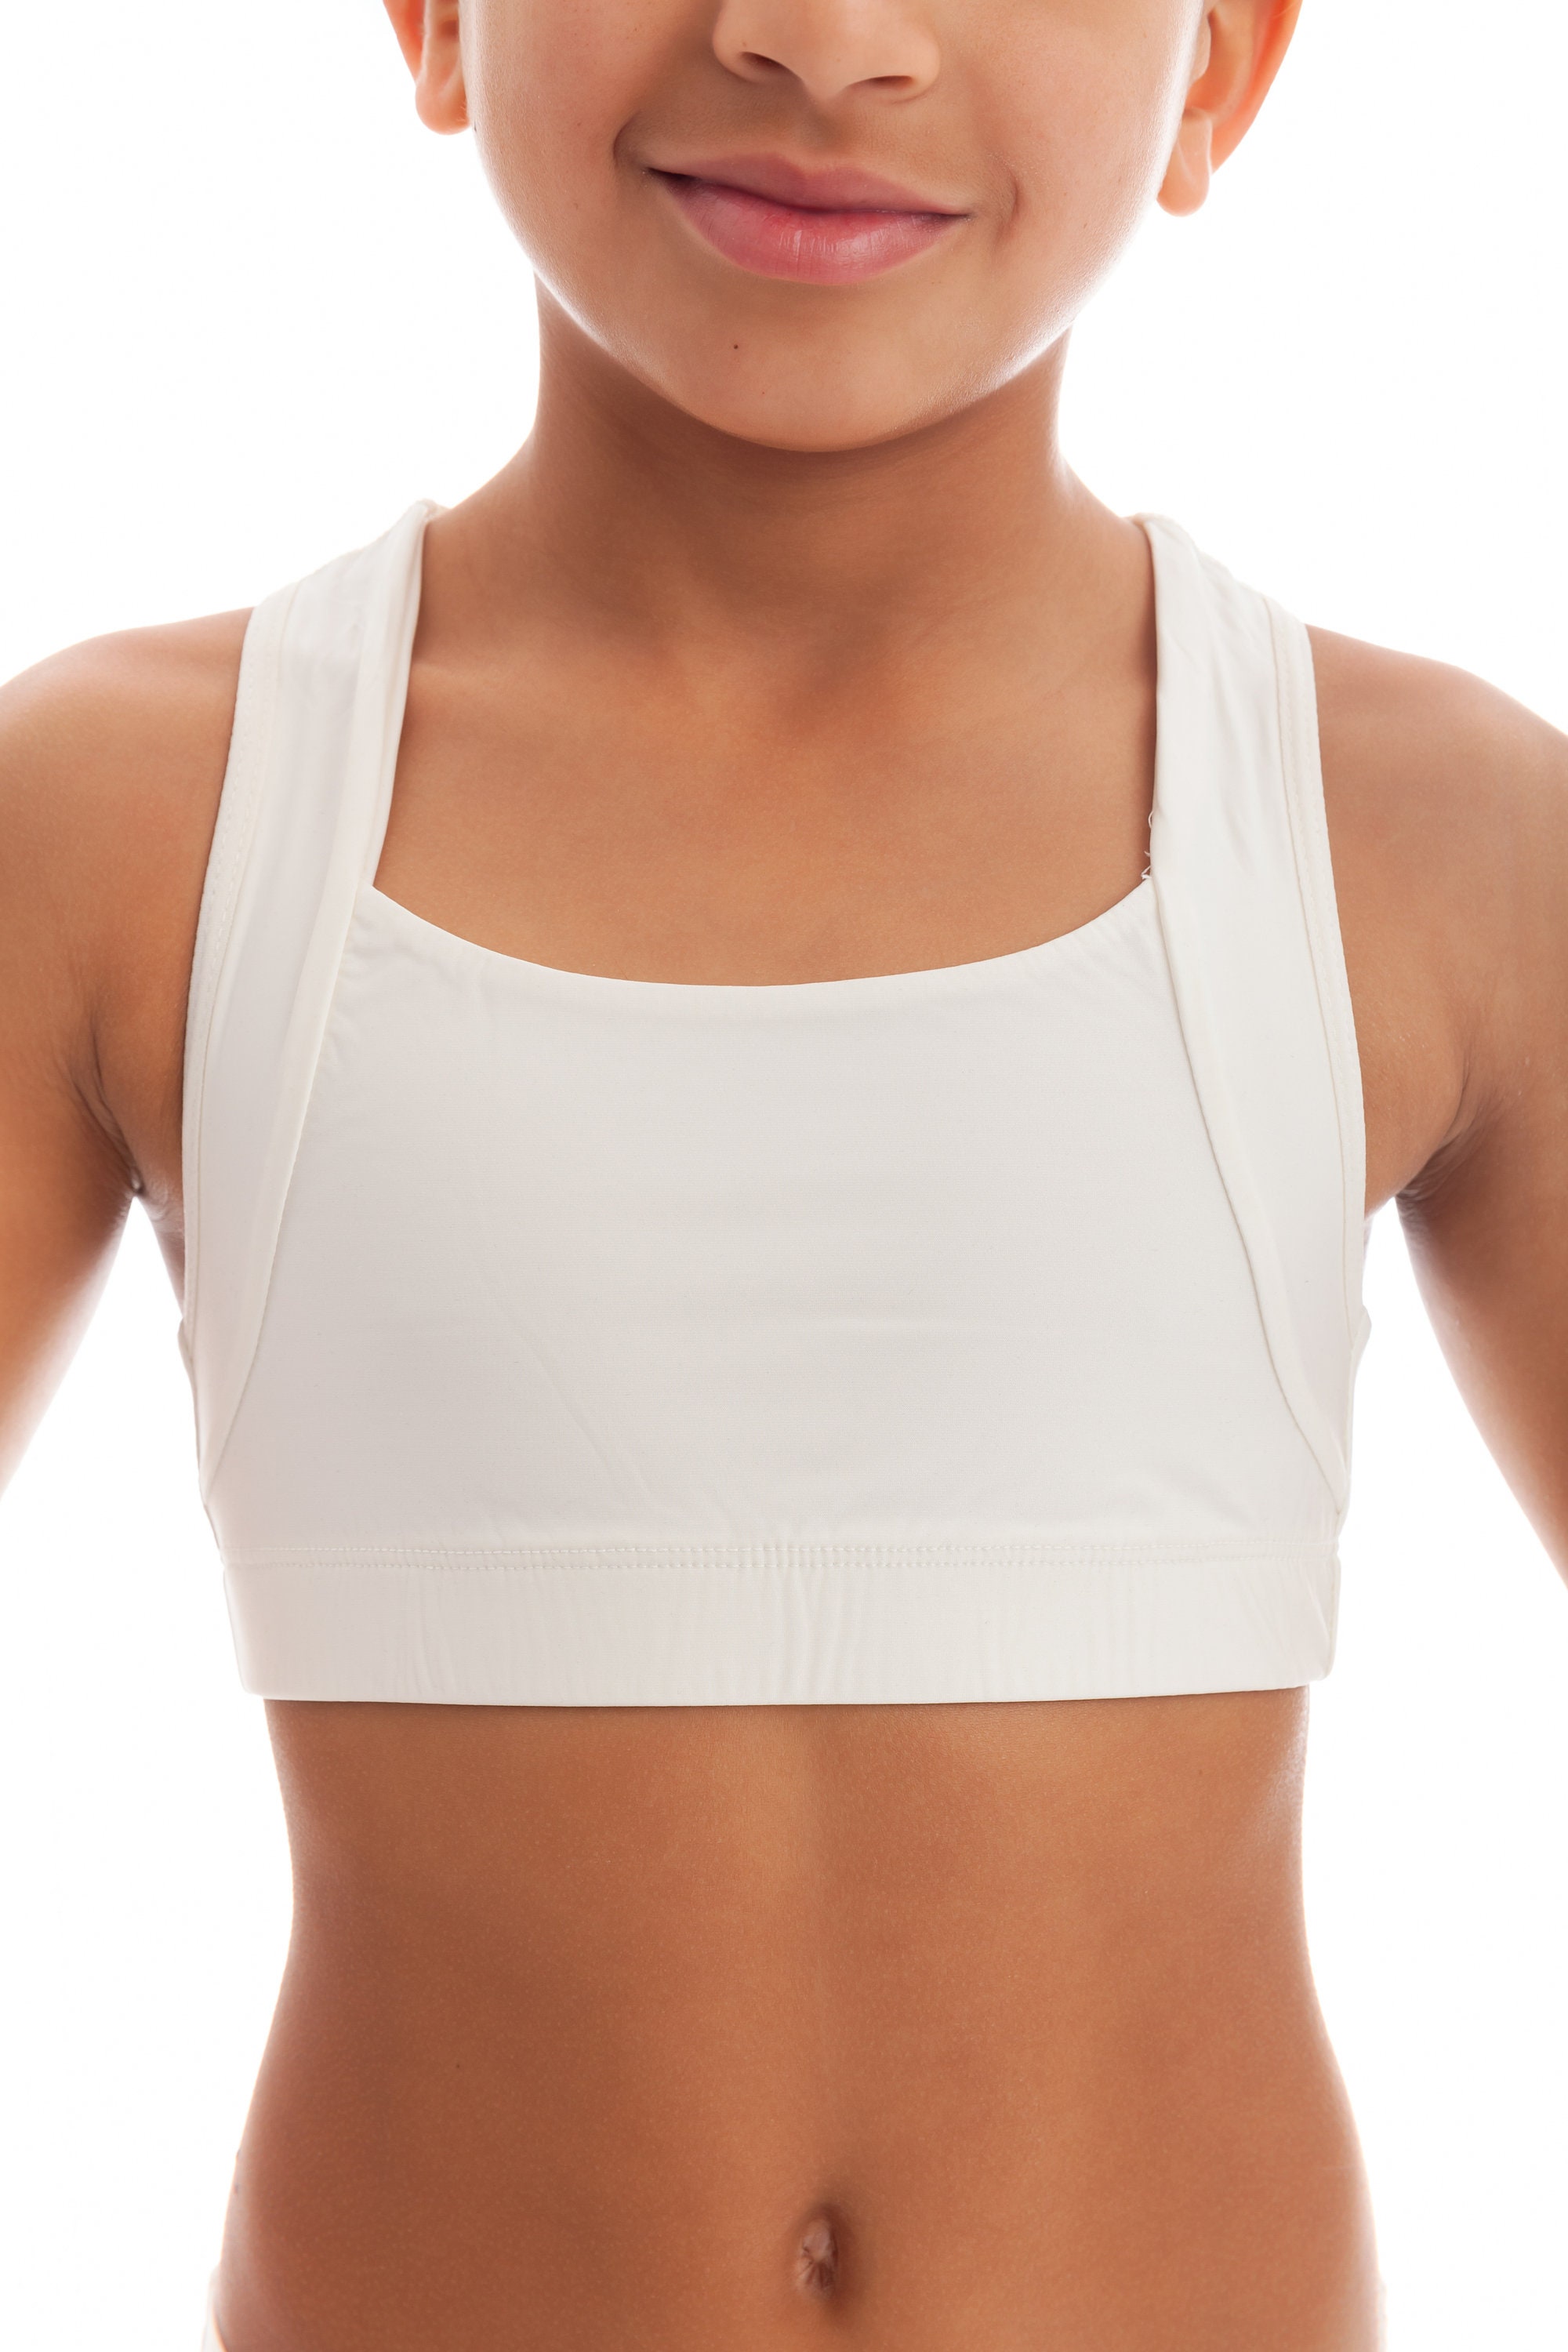 A Teenage Girl in a White Sports Bra and a White Shirt · Free